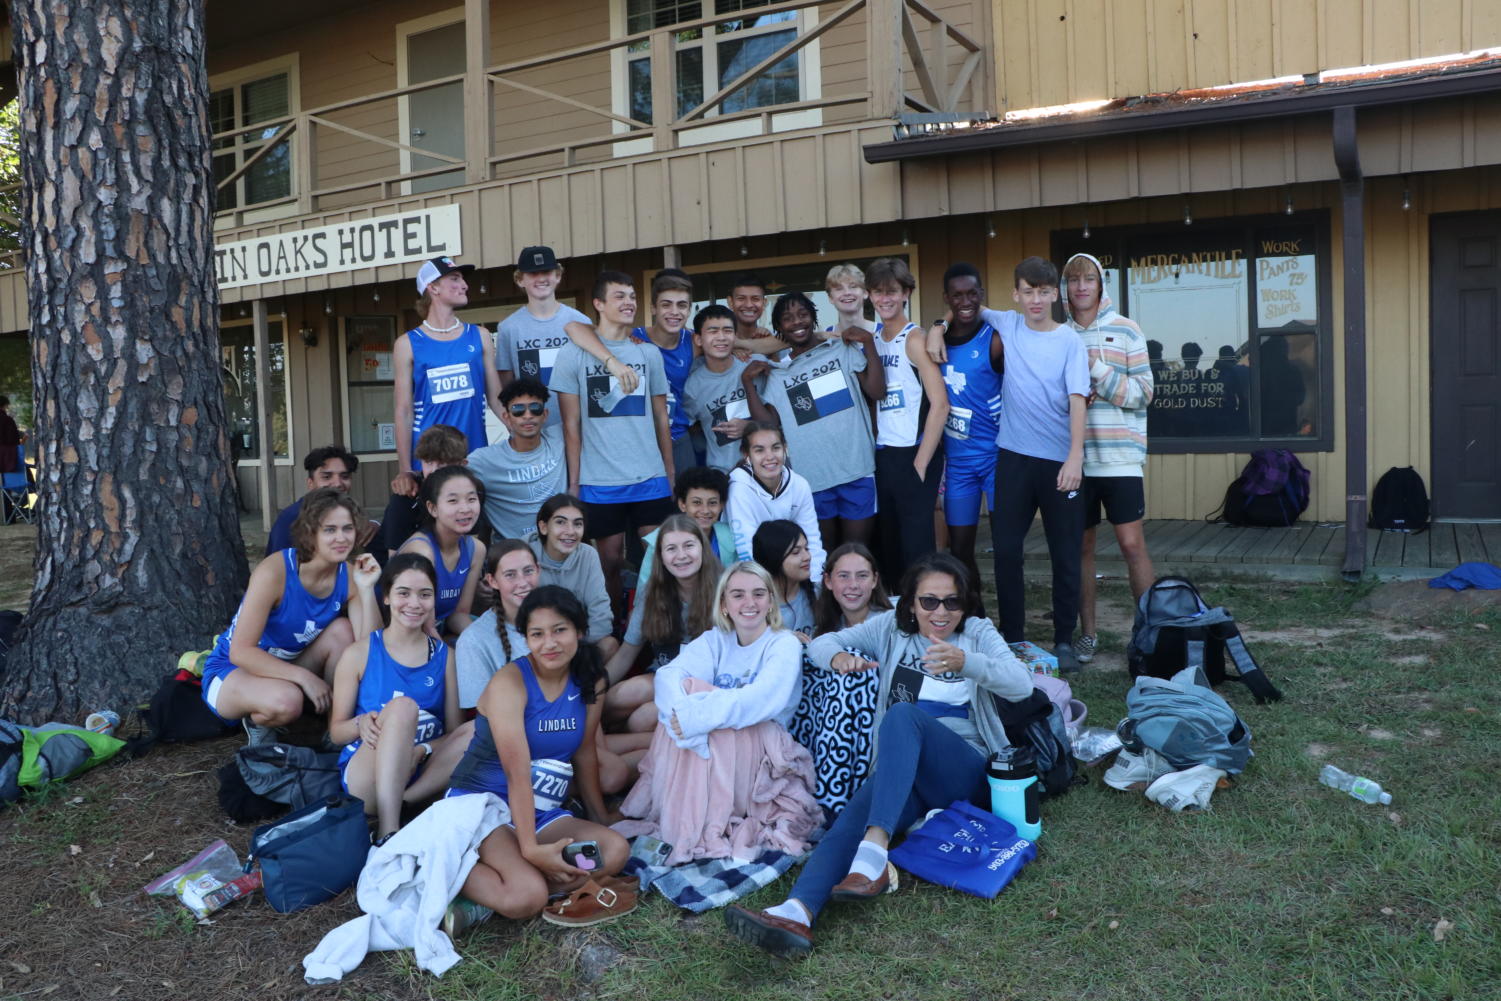 The cross country team poses for a photo after a meet. Both the boys and girls teams are featured here.